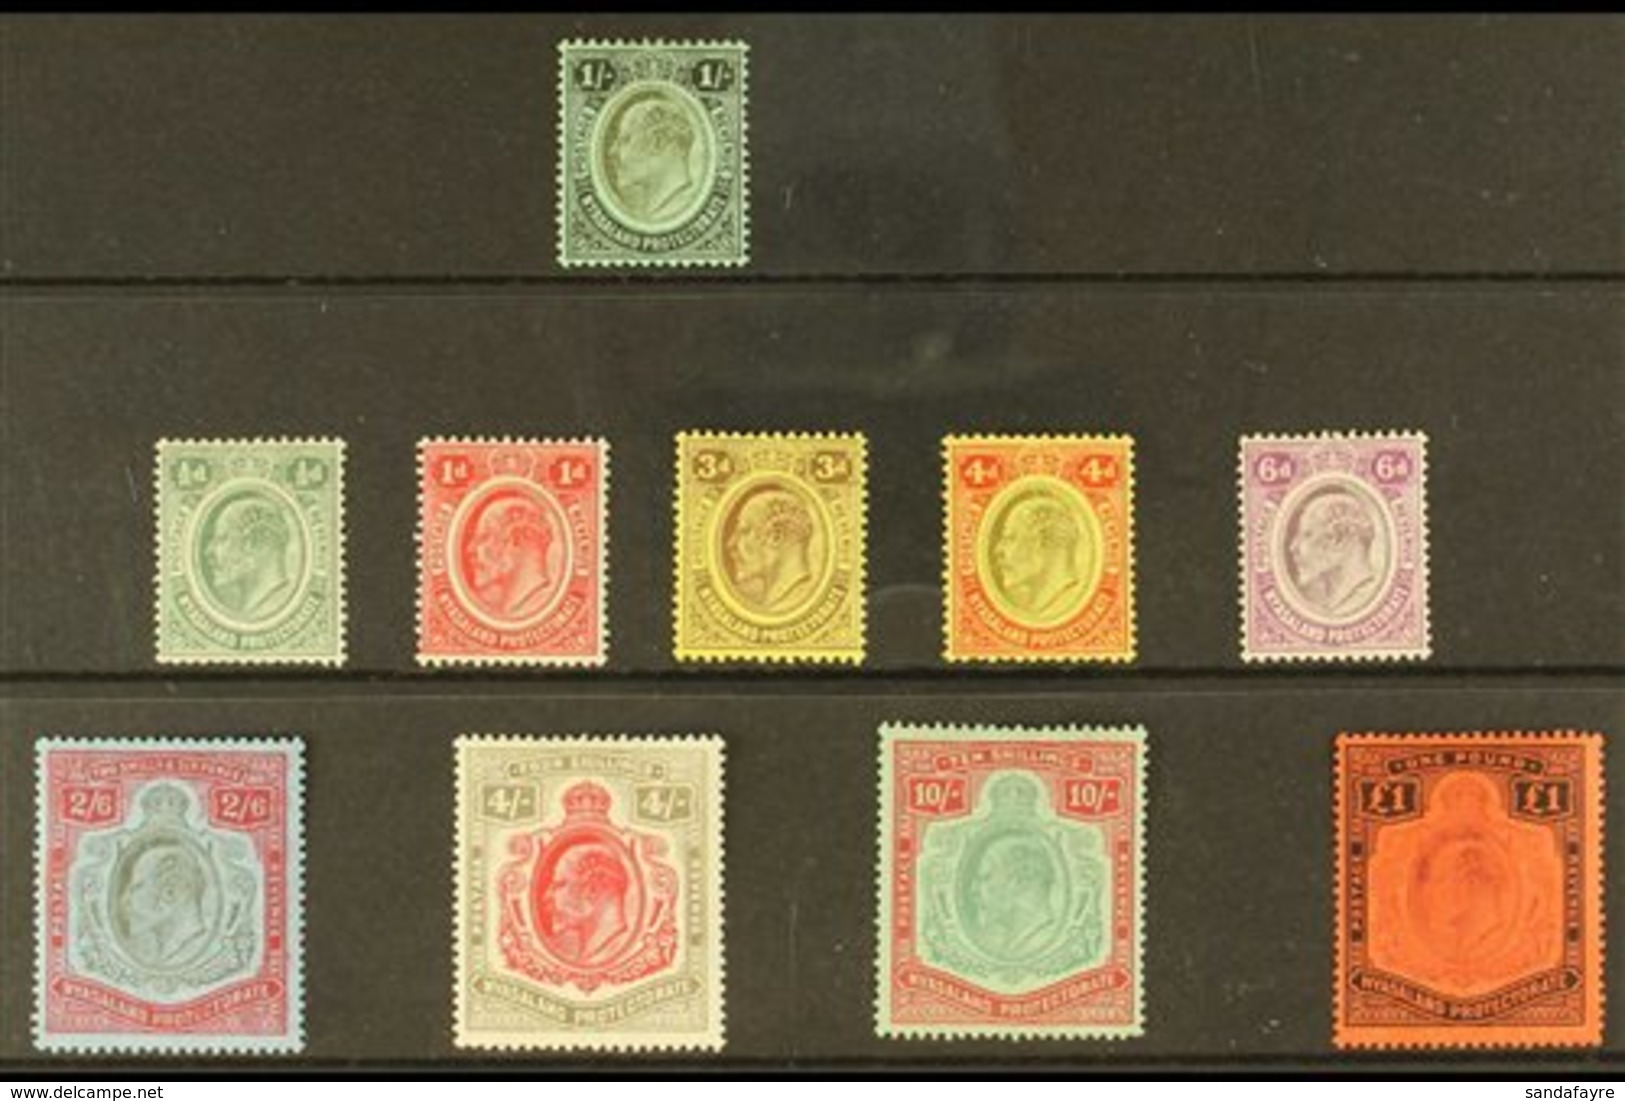 1908-1911 KEVII Definitive Set To £1, SG 72/81, The £1 With Faded Vignette With Some Light Surface Rubbing, The Rest, Ve - Nyasaland (1907-1953)